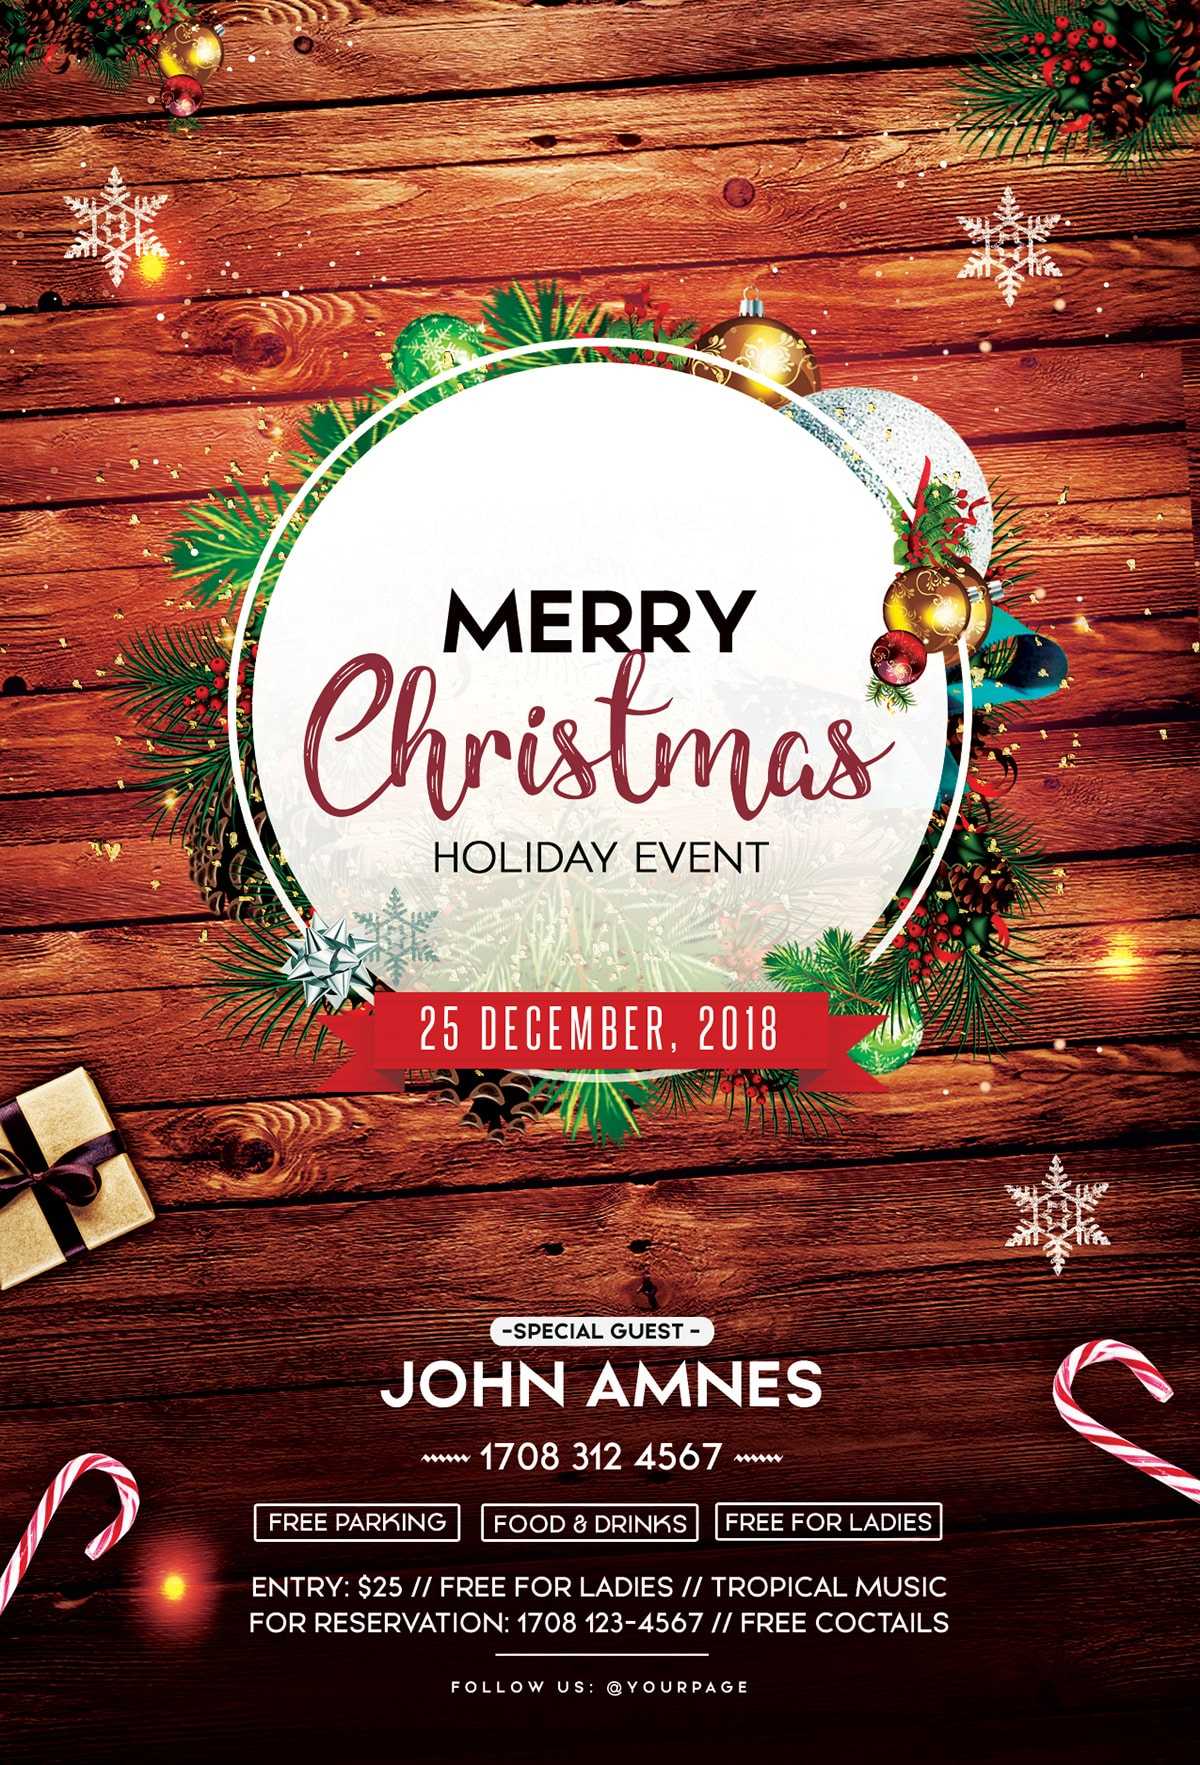 Merry Christmas 2018 – Free Psd Flyer Template – Free Psd Throughout Christmas Brochure Templates Free